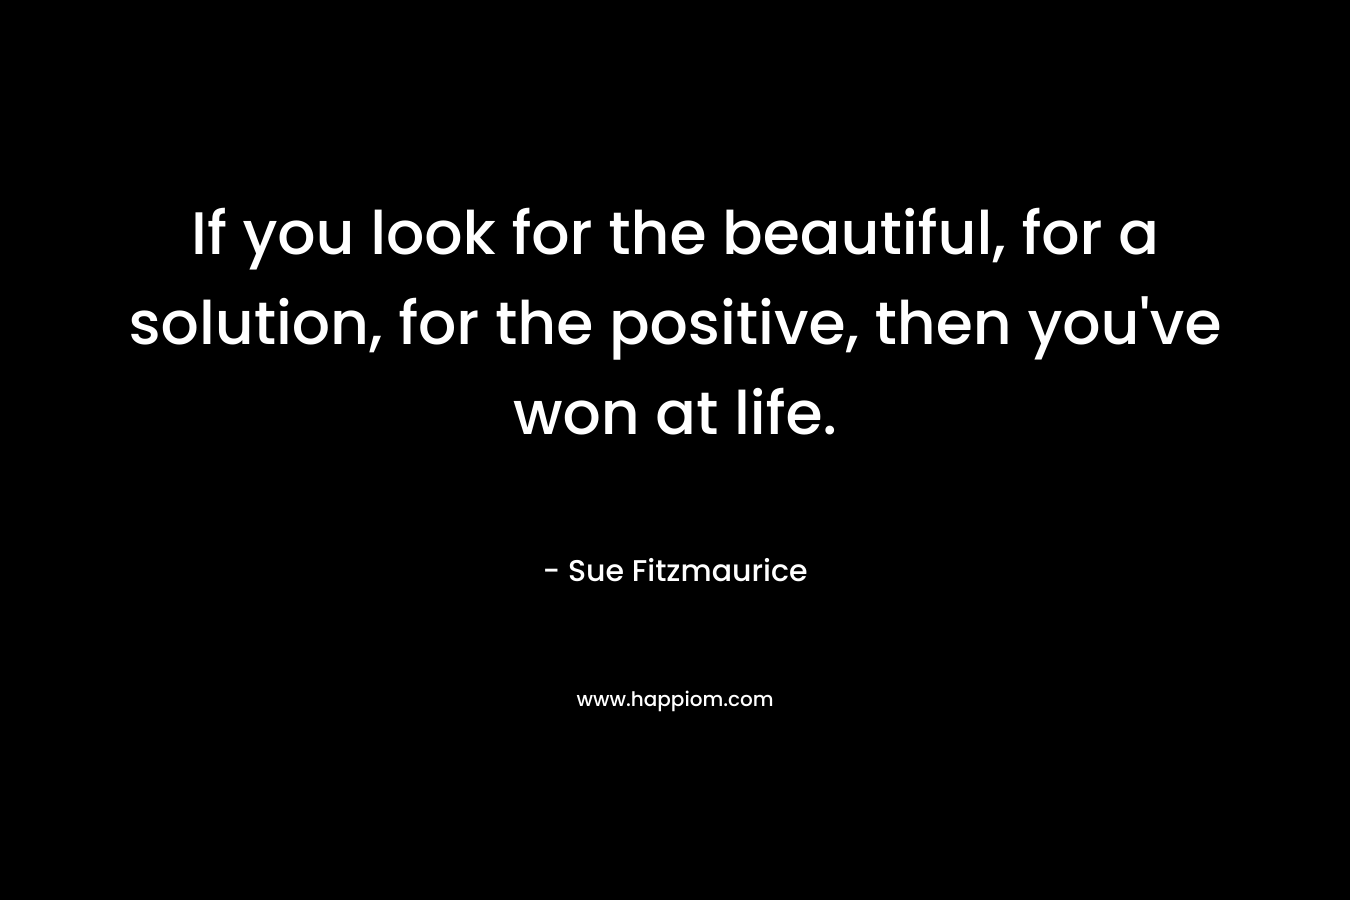 If you look for the beautiful, for a solution, for the positive, then you've won at life.